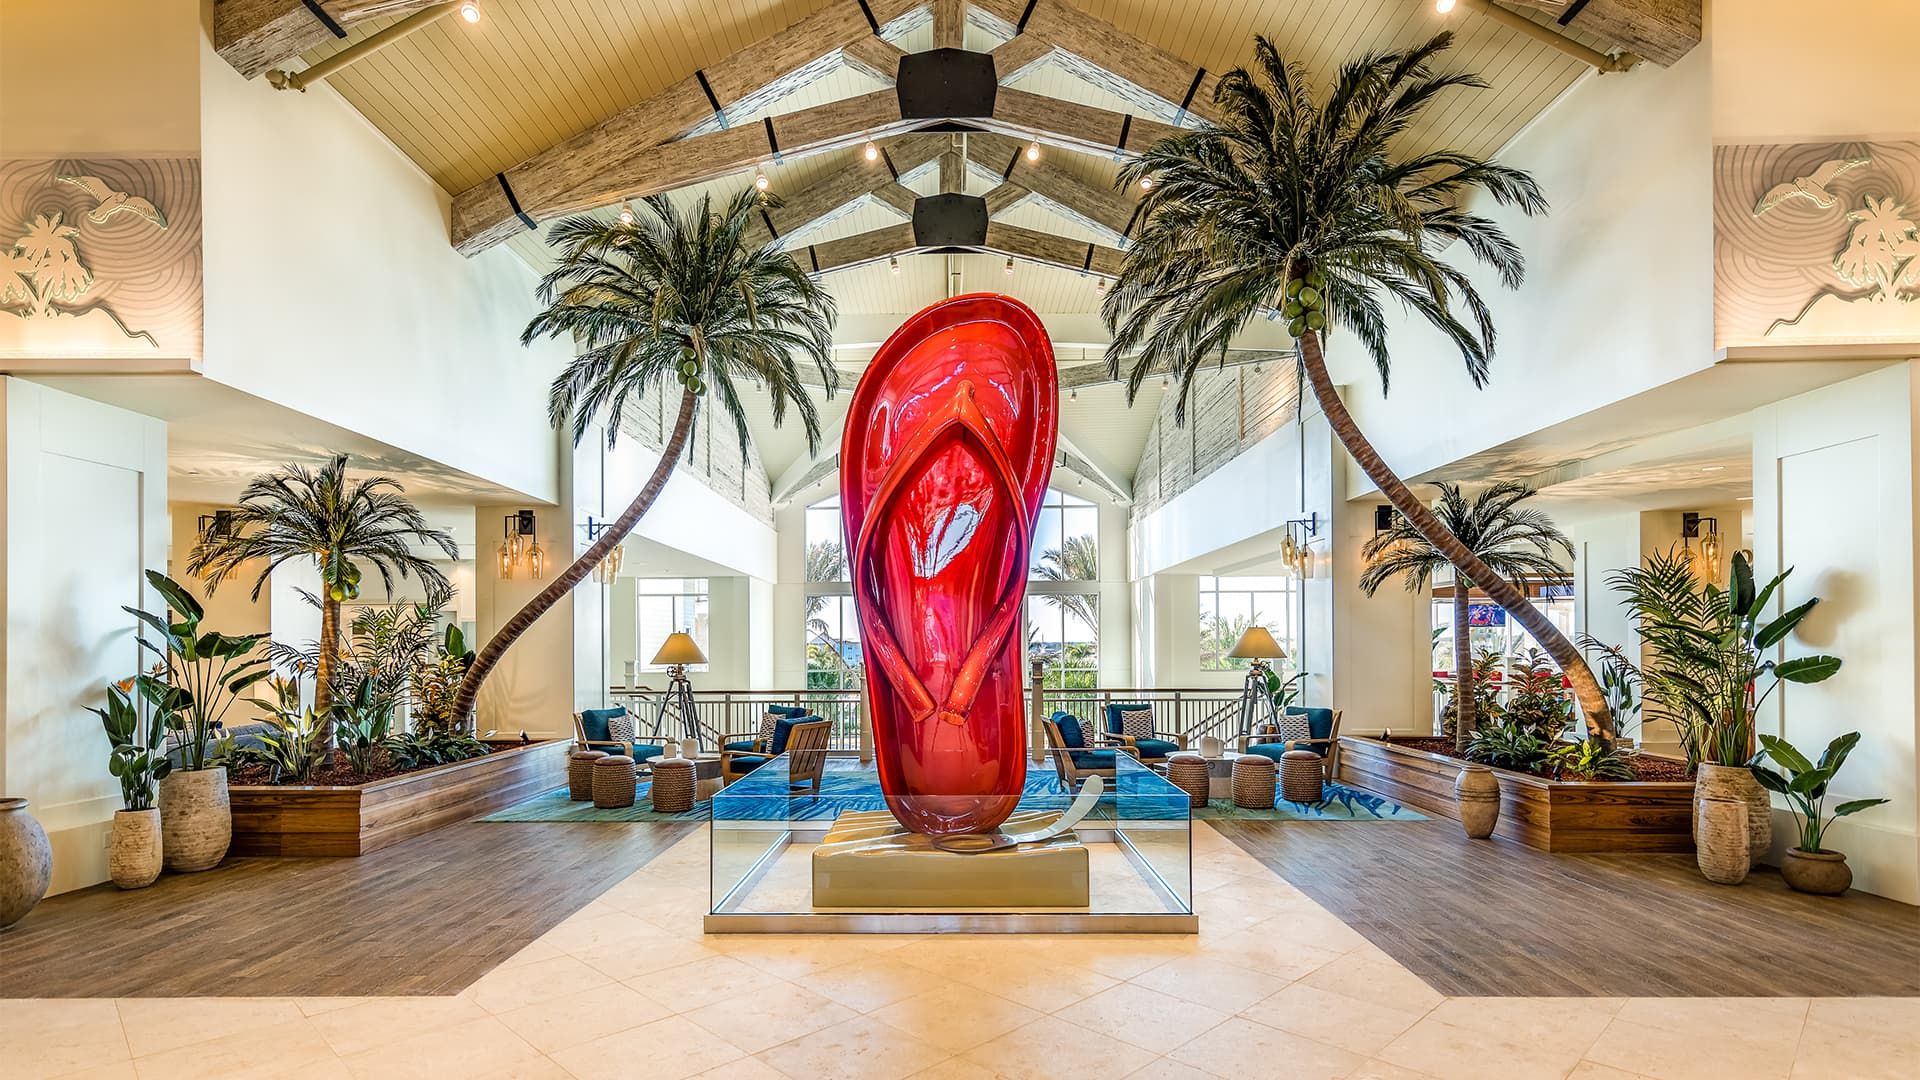 A giant flip flop sculpture at the center of the Margaritaville Resort Orlando hotel lobby.